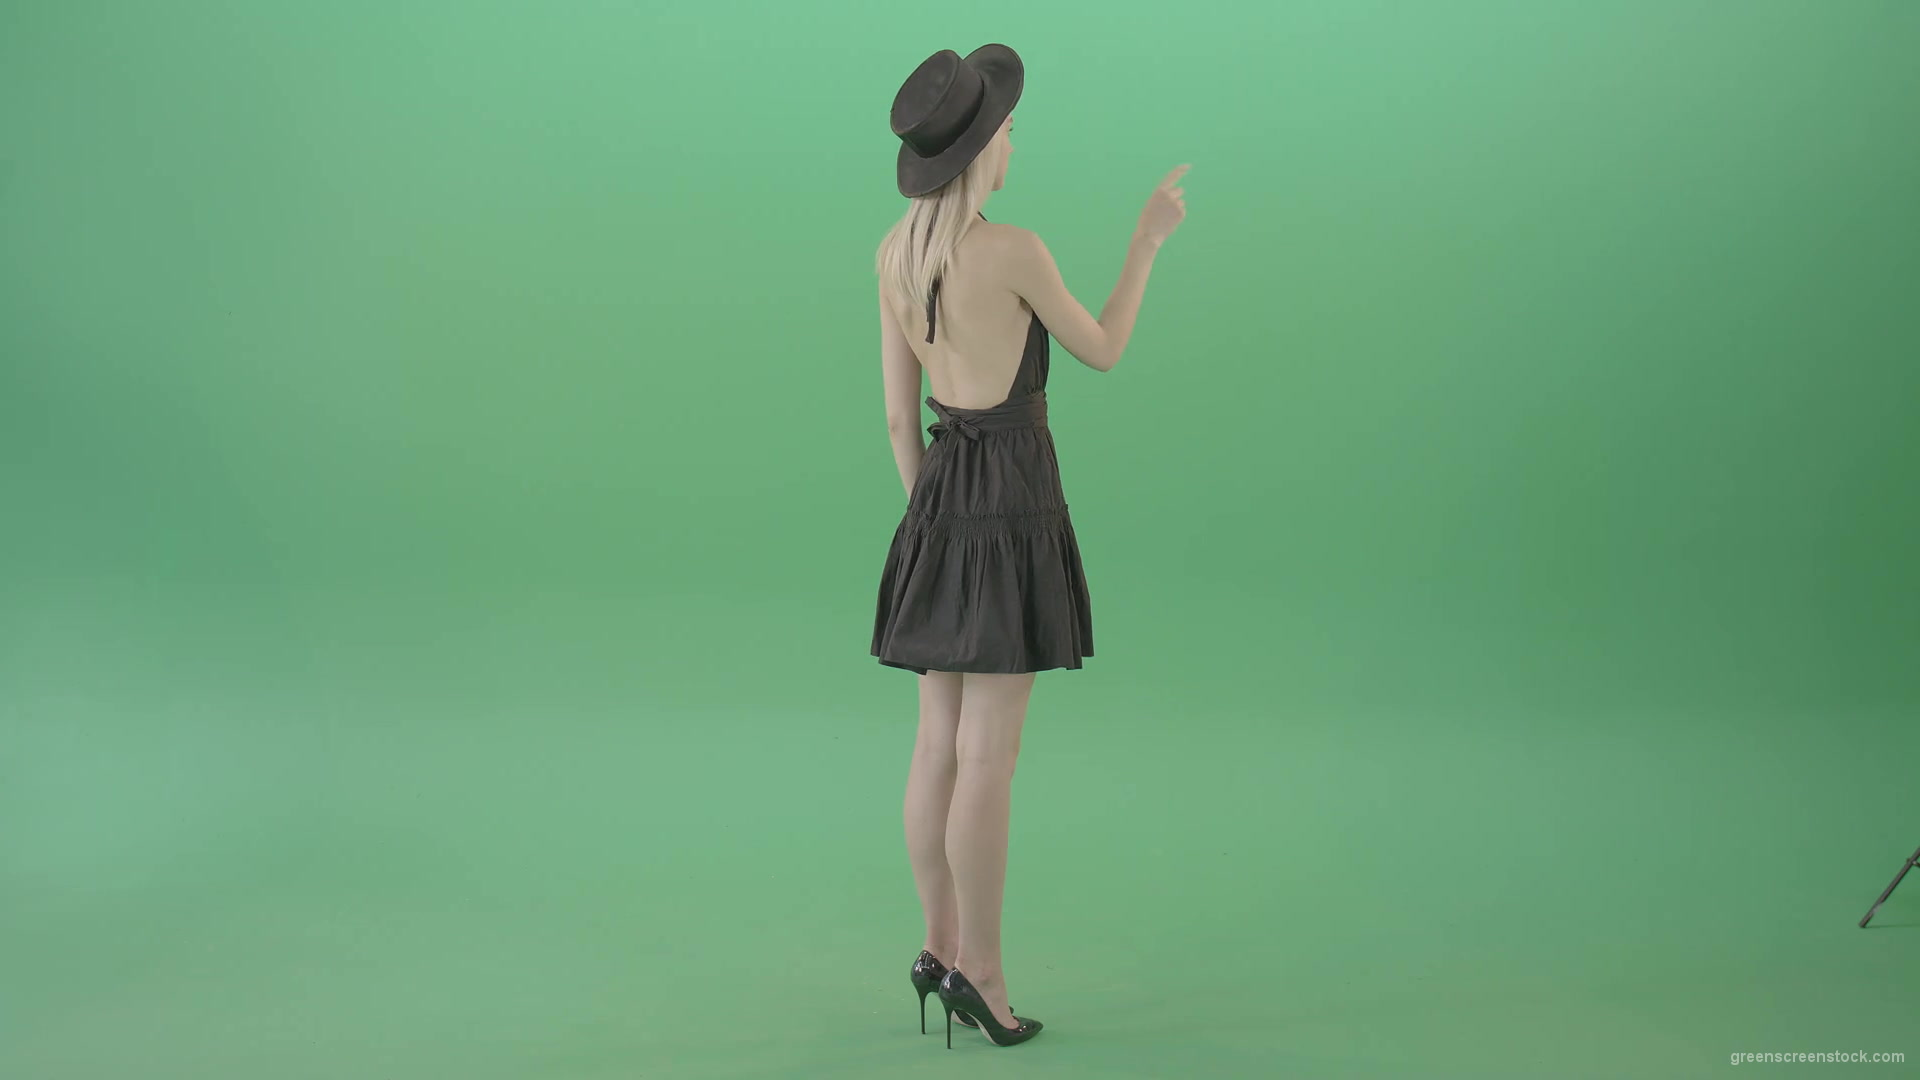 Full-size-fashion-girl-looking-virtual-products-on-touch-green-screen-4K-Video-Footage-1920_008 Green Screen Stock